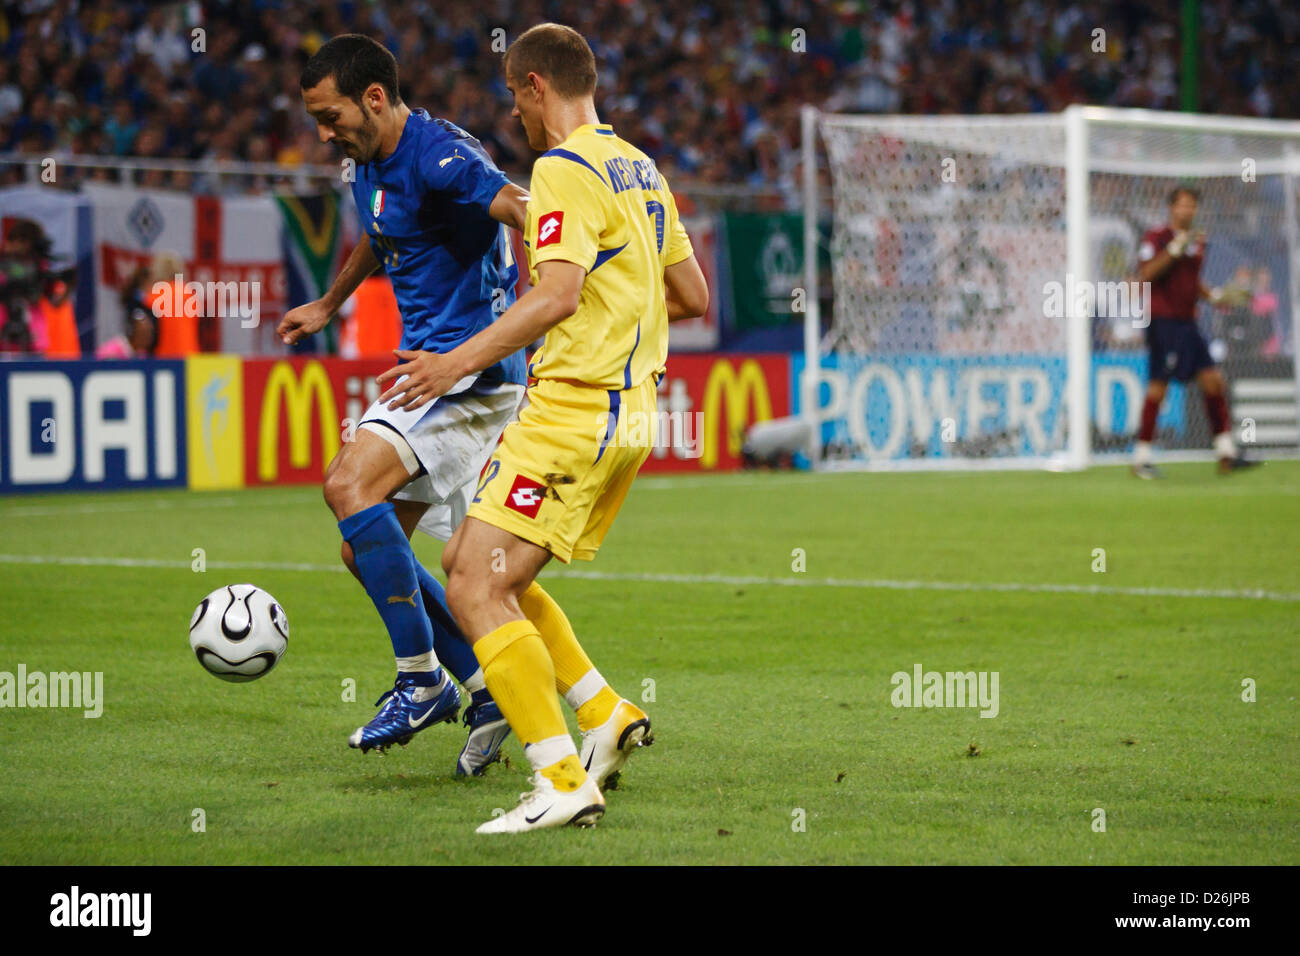 Gianluca Zambrotta of Italy (L) controls the ball against Andriy Nesmachnyi of Ukraine (R) during a World Cup quarterfinal match Stock Photo